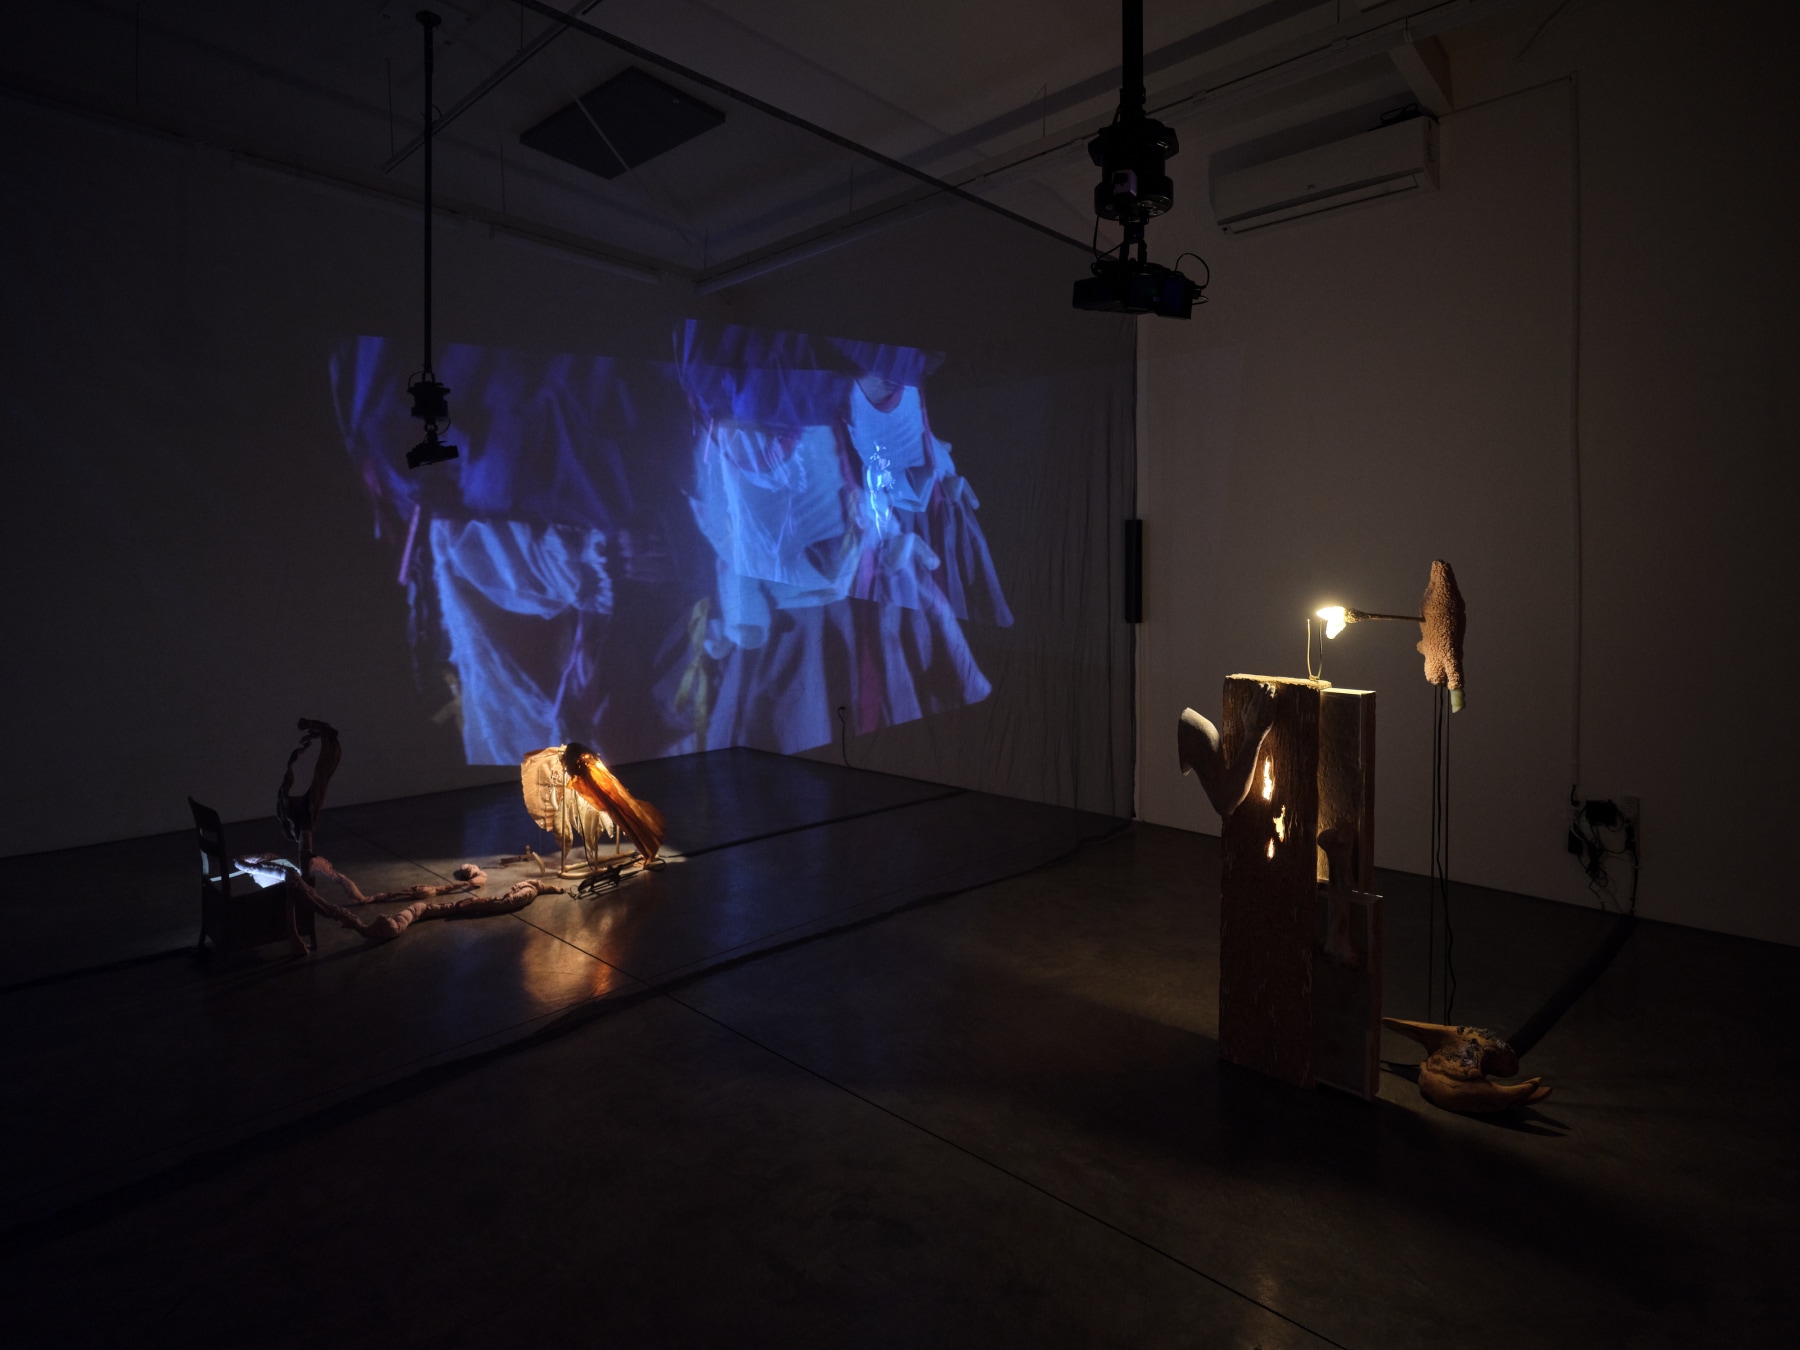  Catalina Ouyang, forgive everything, installation view, 2022